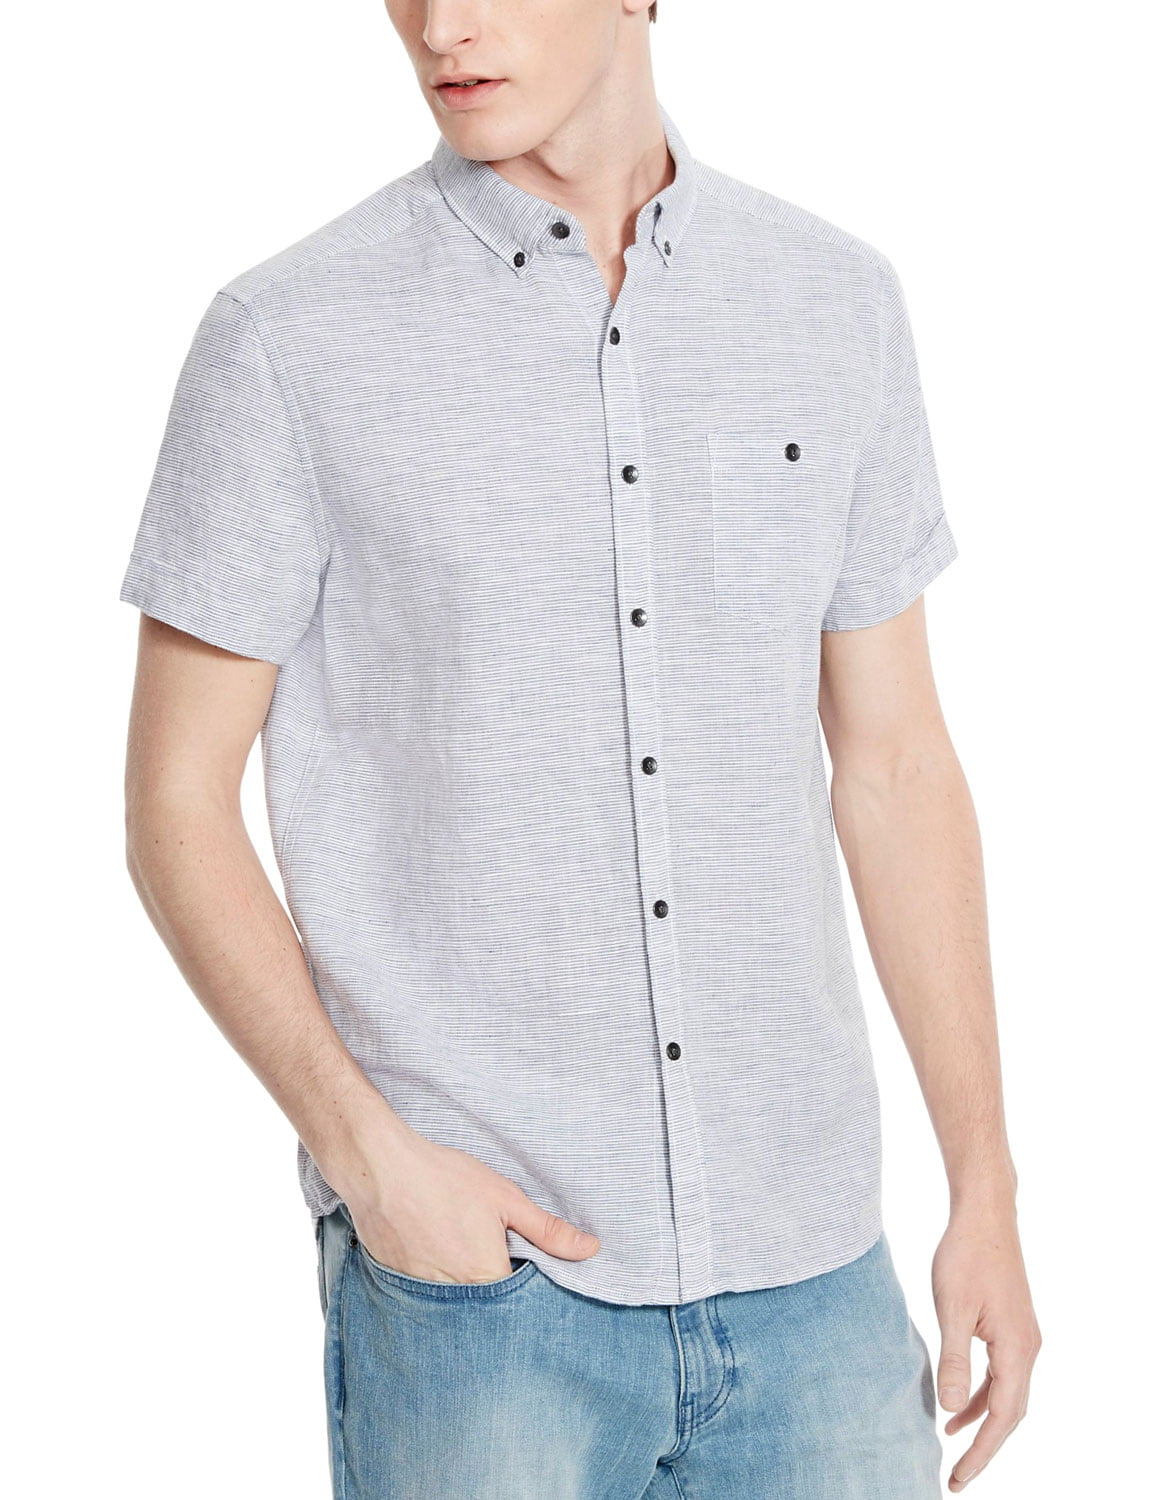 Kenneth Cole - KENNETH COLE Reaction Short Sleeve Striped Shirt Smokey ...